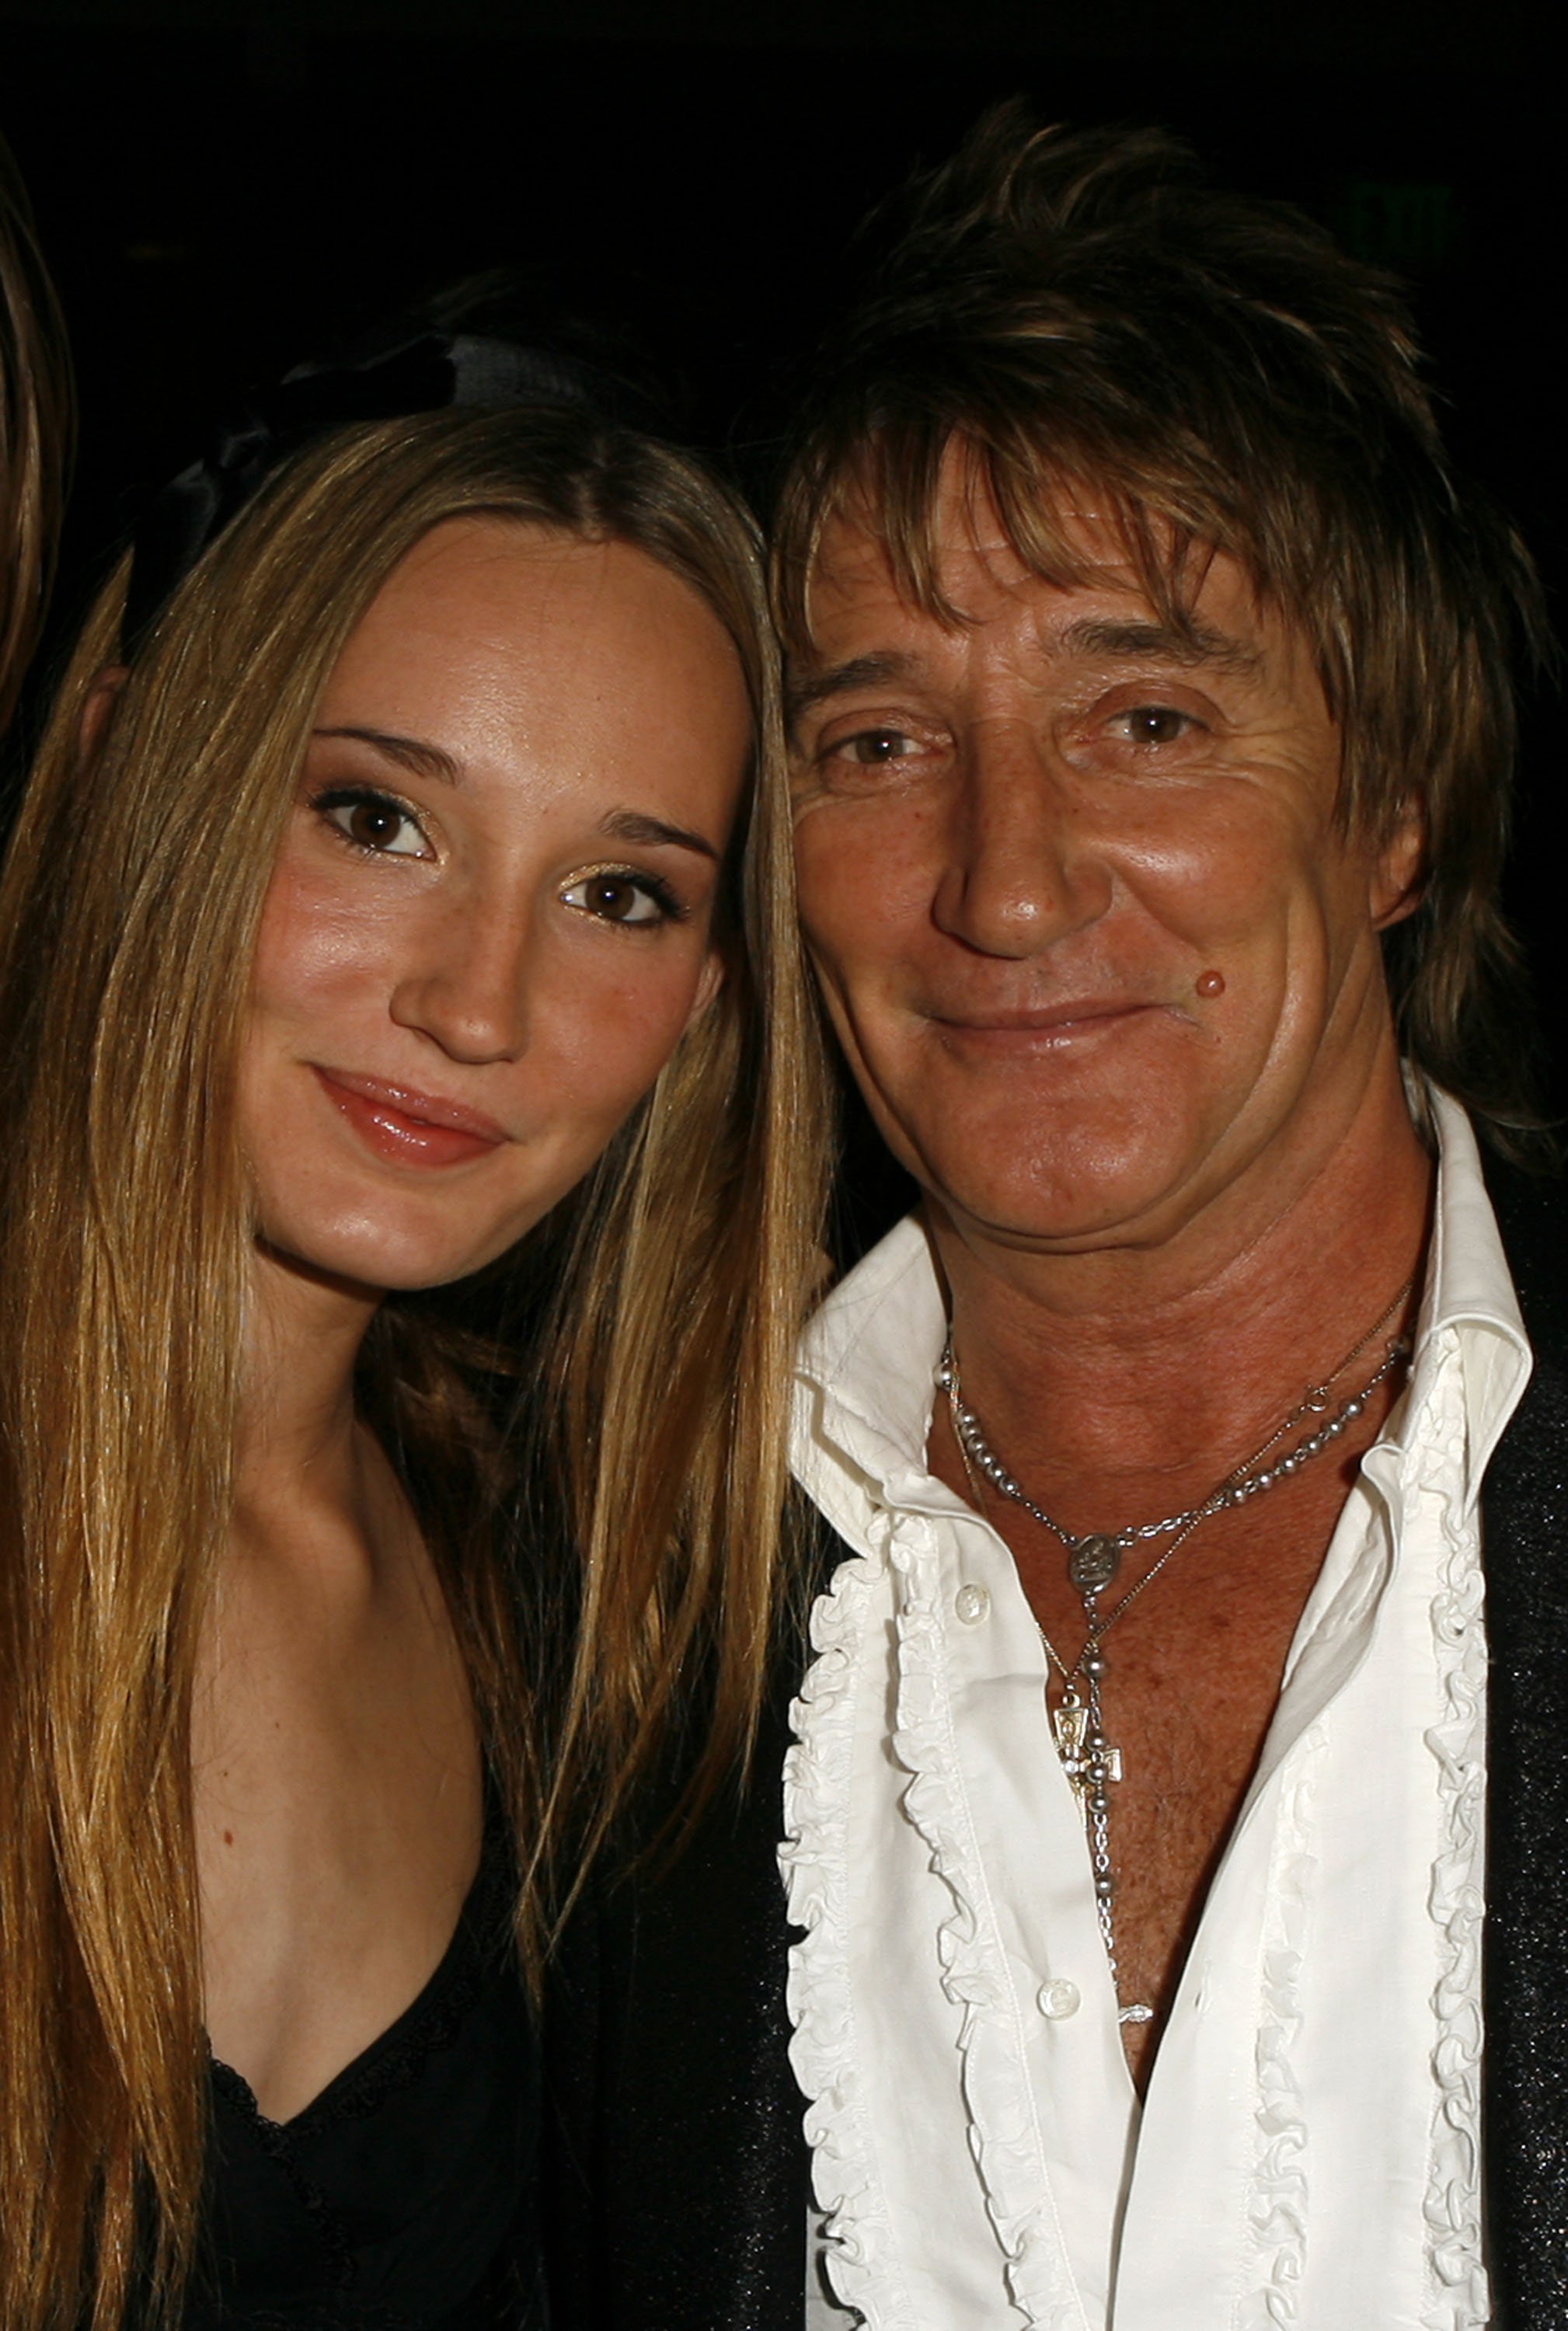 Ruby and Rod Stewart during Clive Davis Pre-Grammy Awards Party in Beverly Hills, California on February 7, 2006 | Source: Getty Images